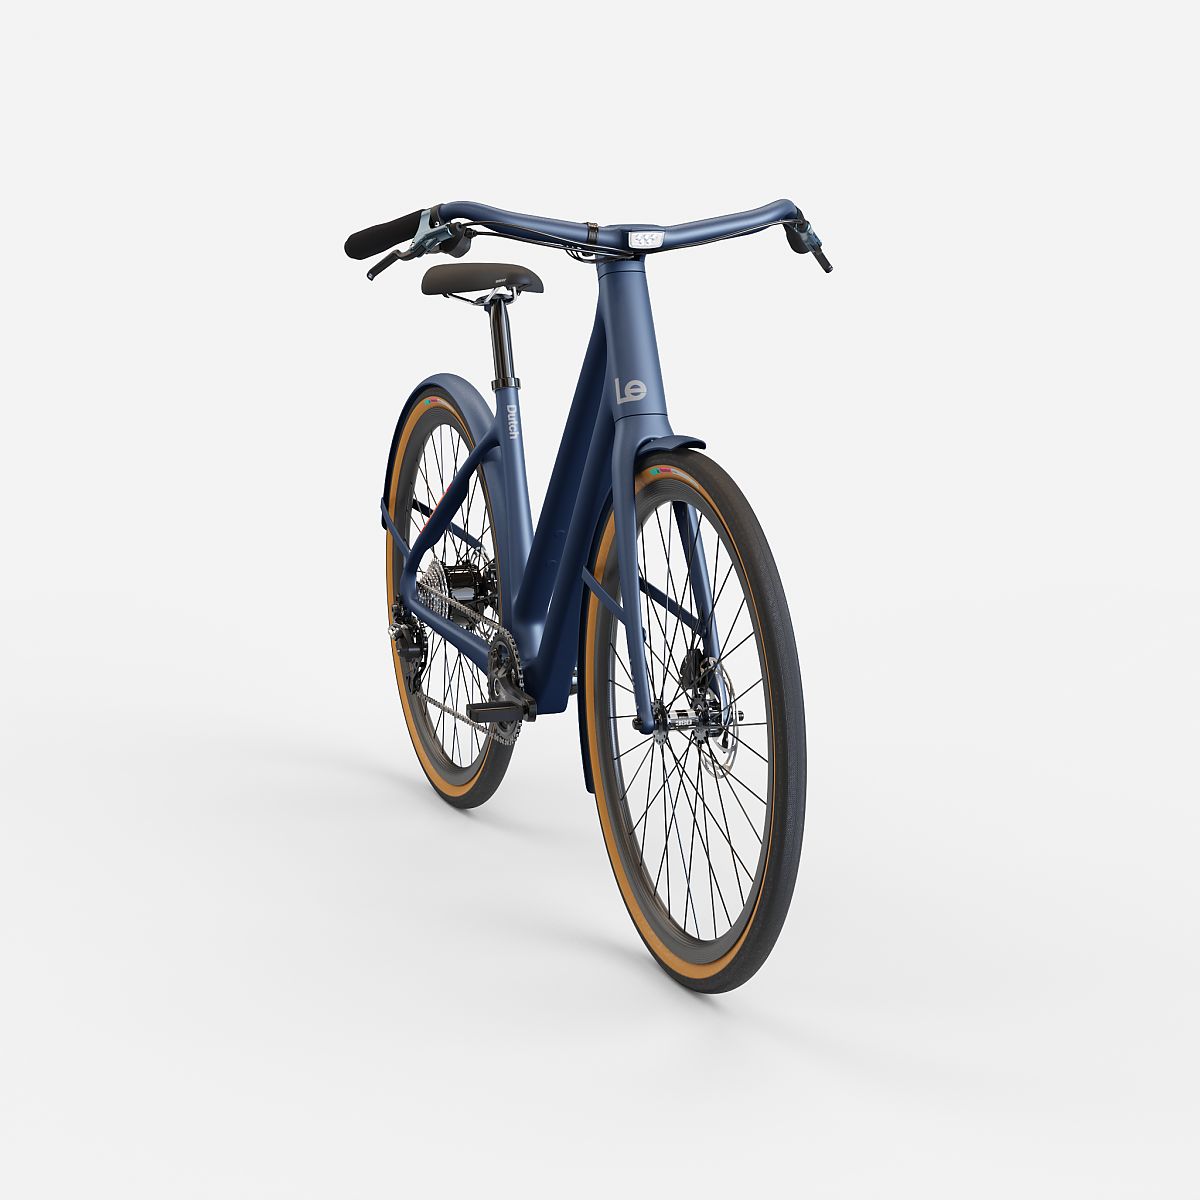 nicht Literaire kunsten evalueren LeMond relaunches with two upscale, carbon fiber city e-bikes; road and  gravel to come | Bicycle Retailer and Industry News